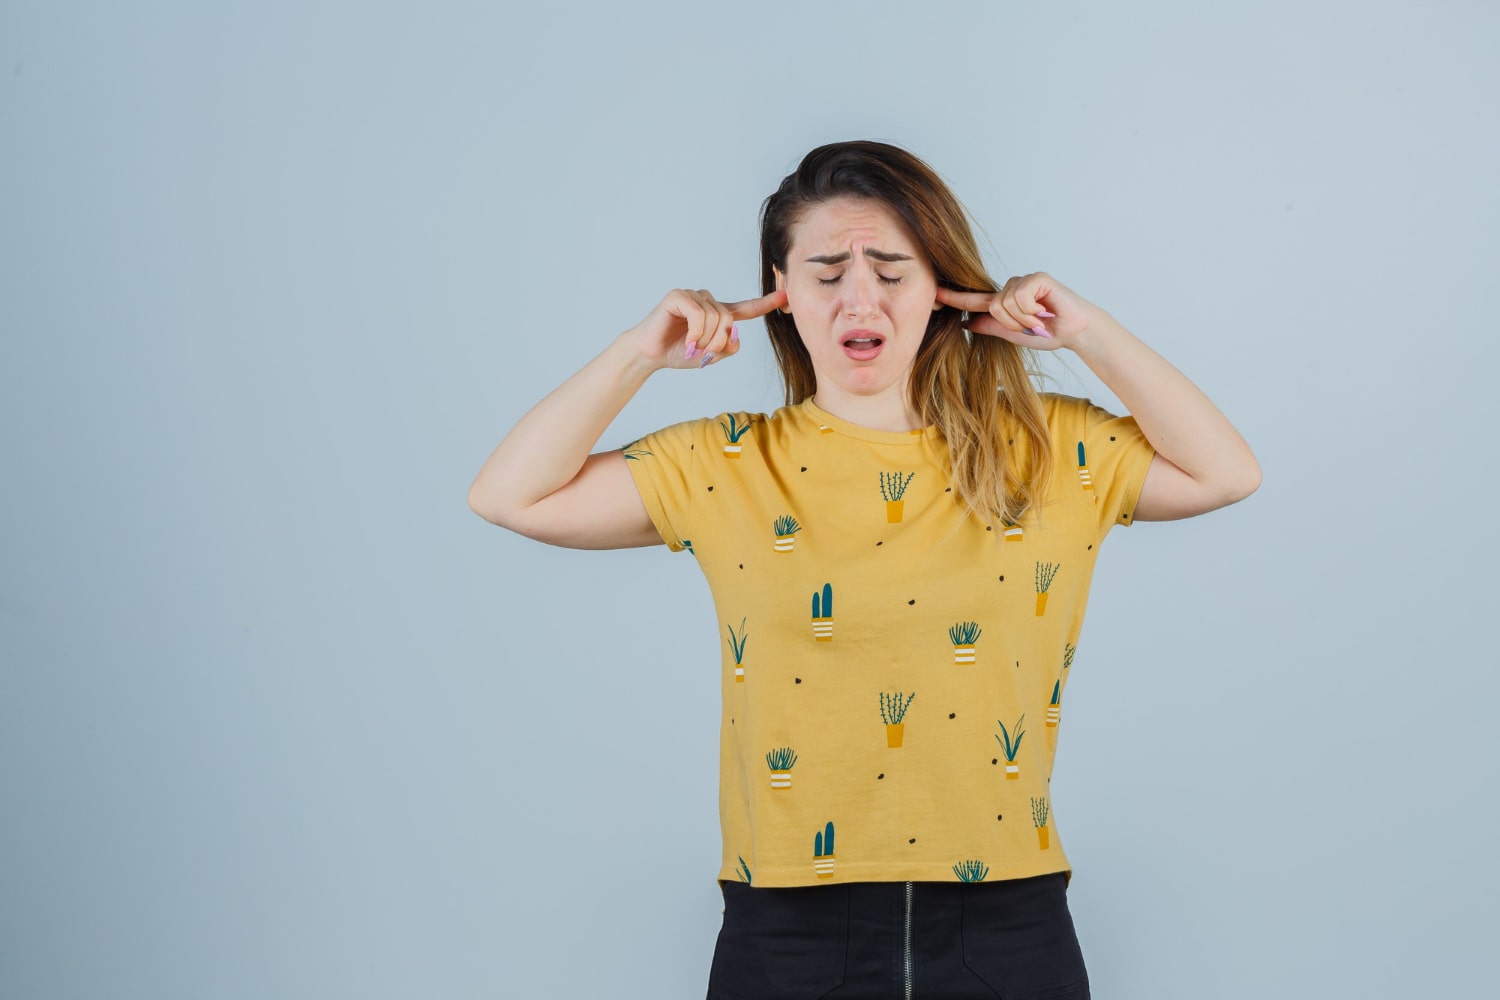 How can you tell if you suffer from noise sensitivity?